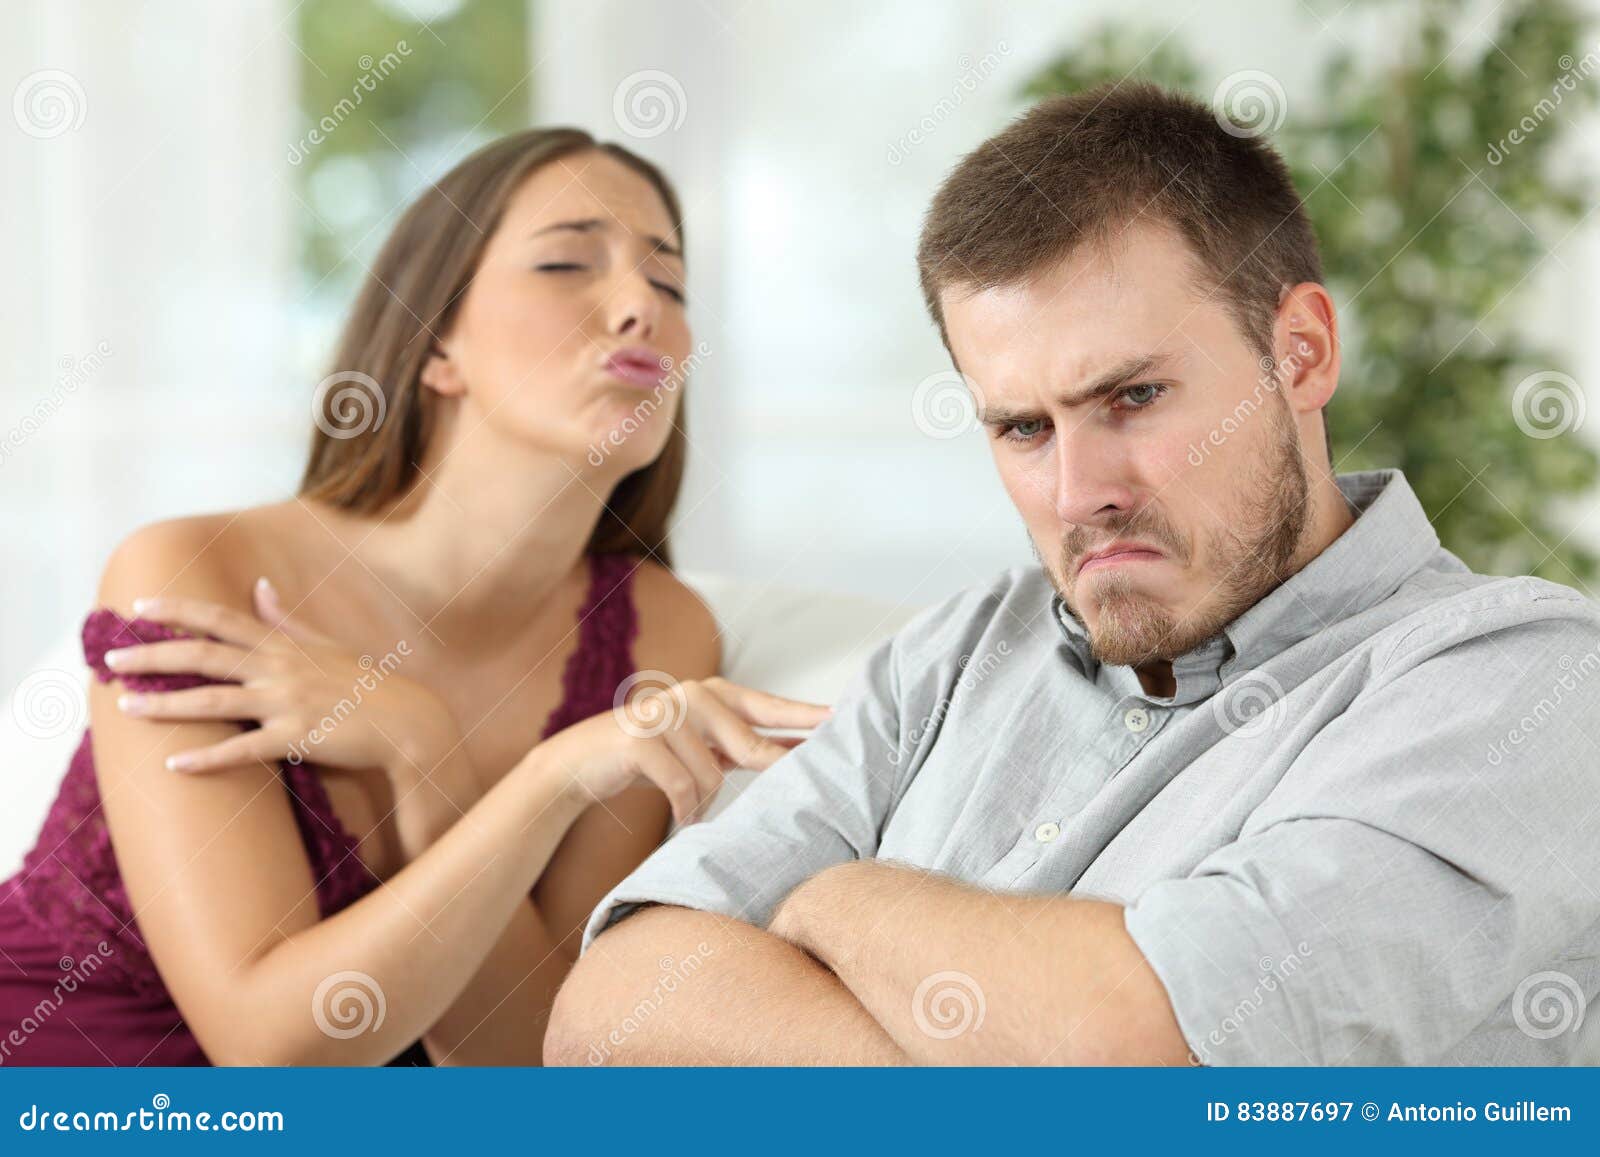 Angry Man Rejecting a Sex Offer from His Girlfriend Stock Image picture